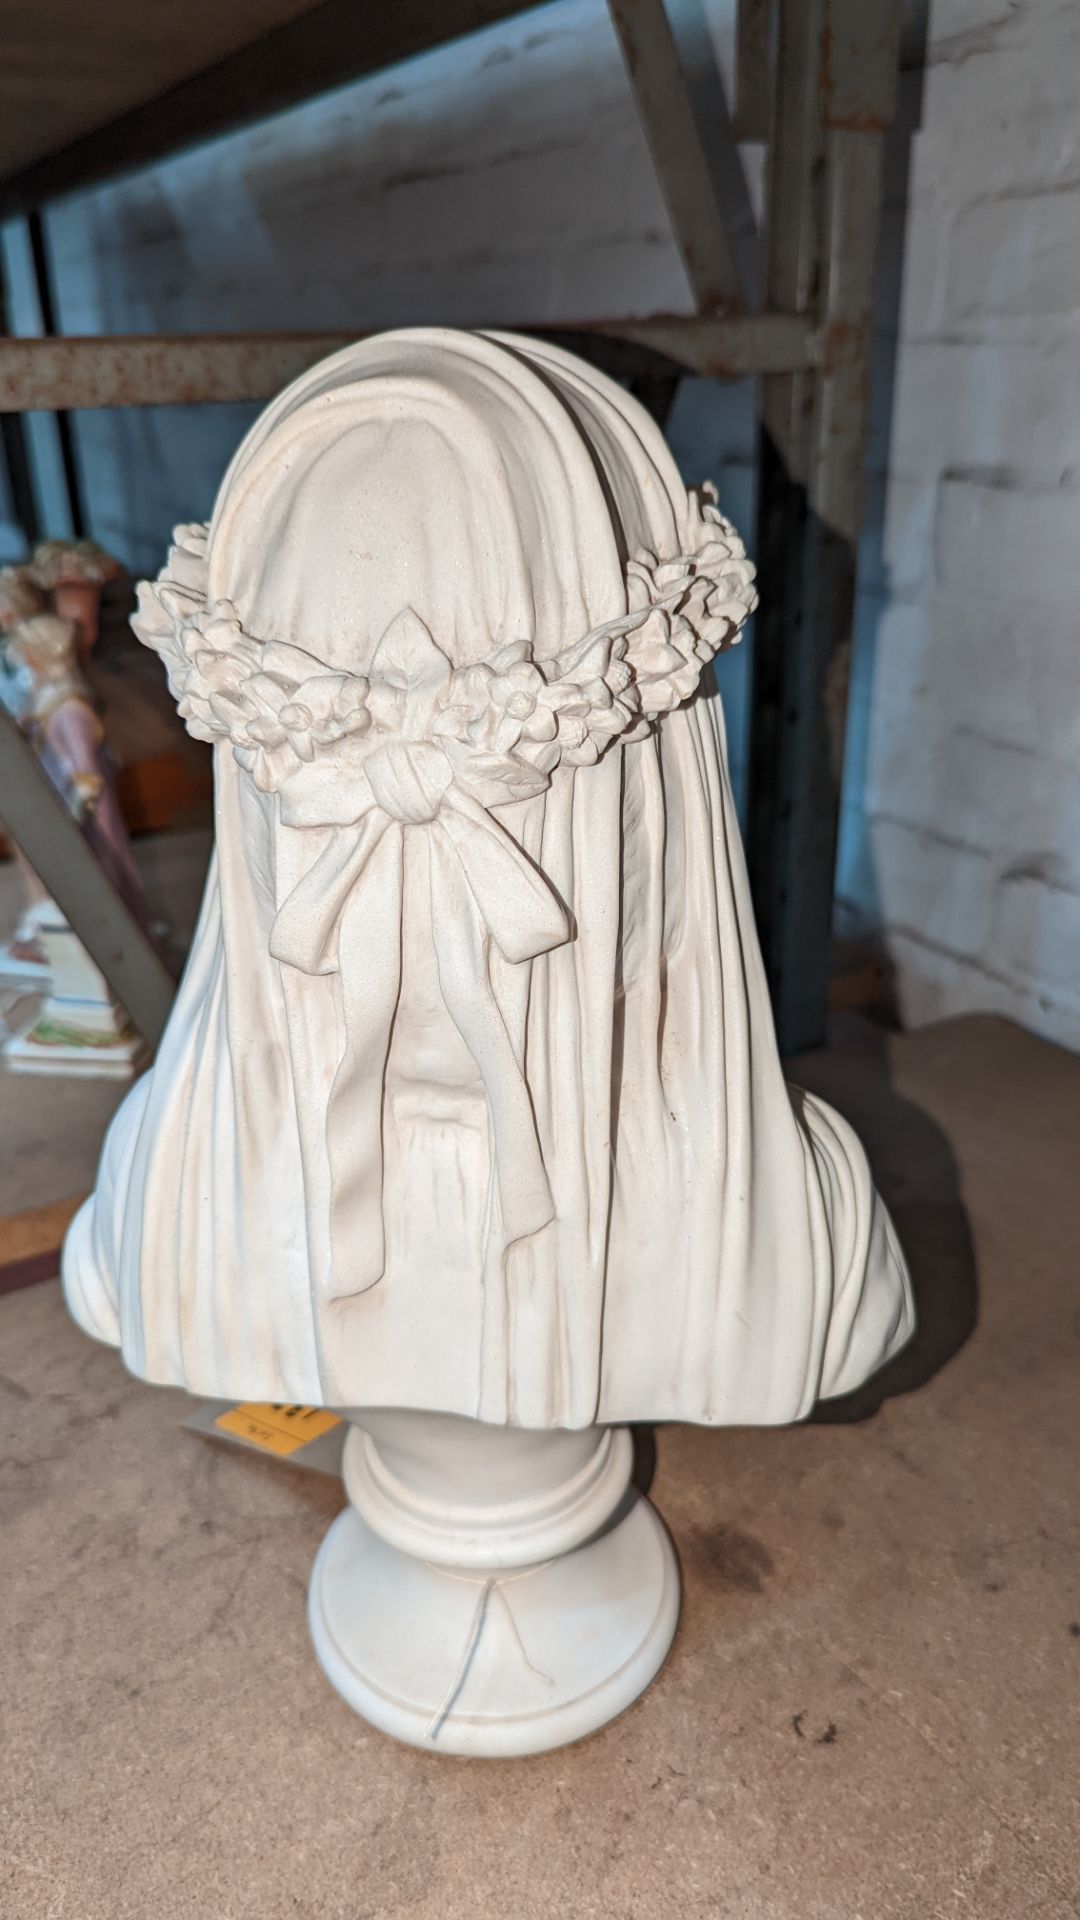 Resin copy bust - Image 8 of 10